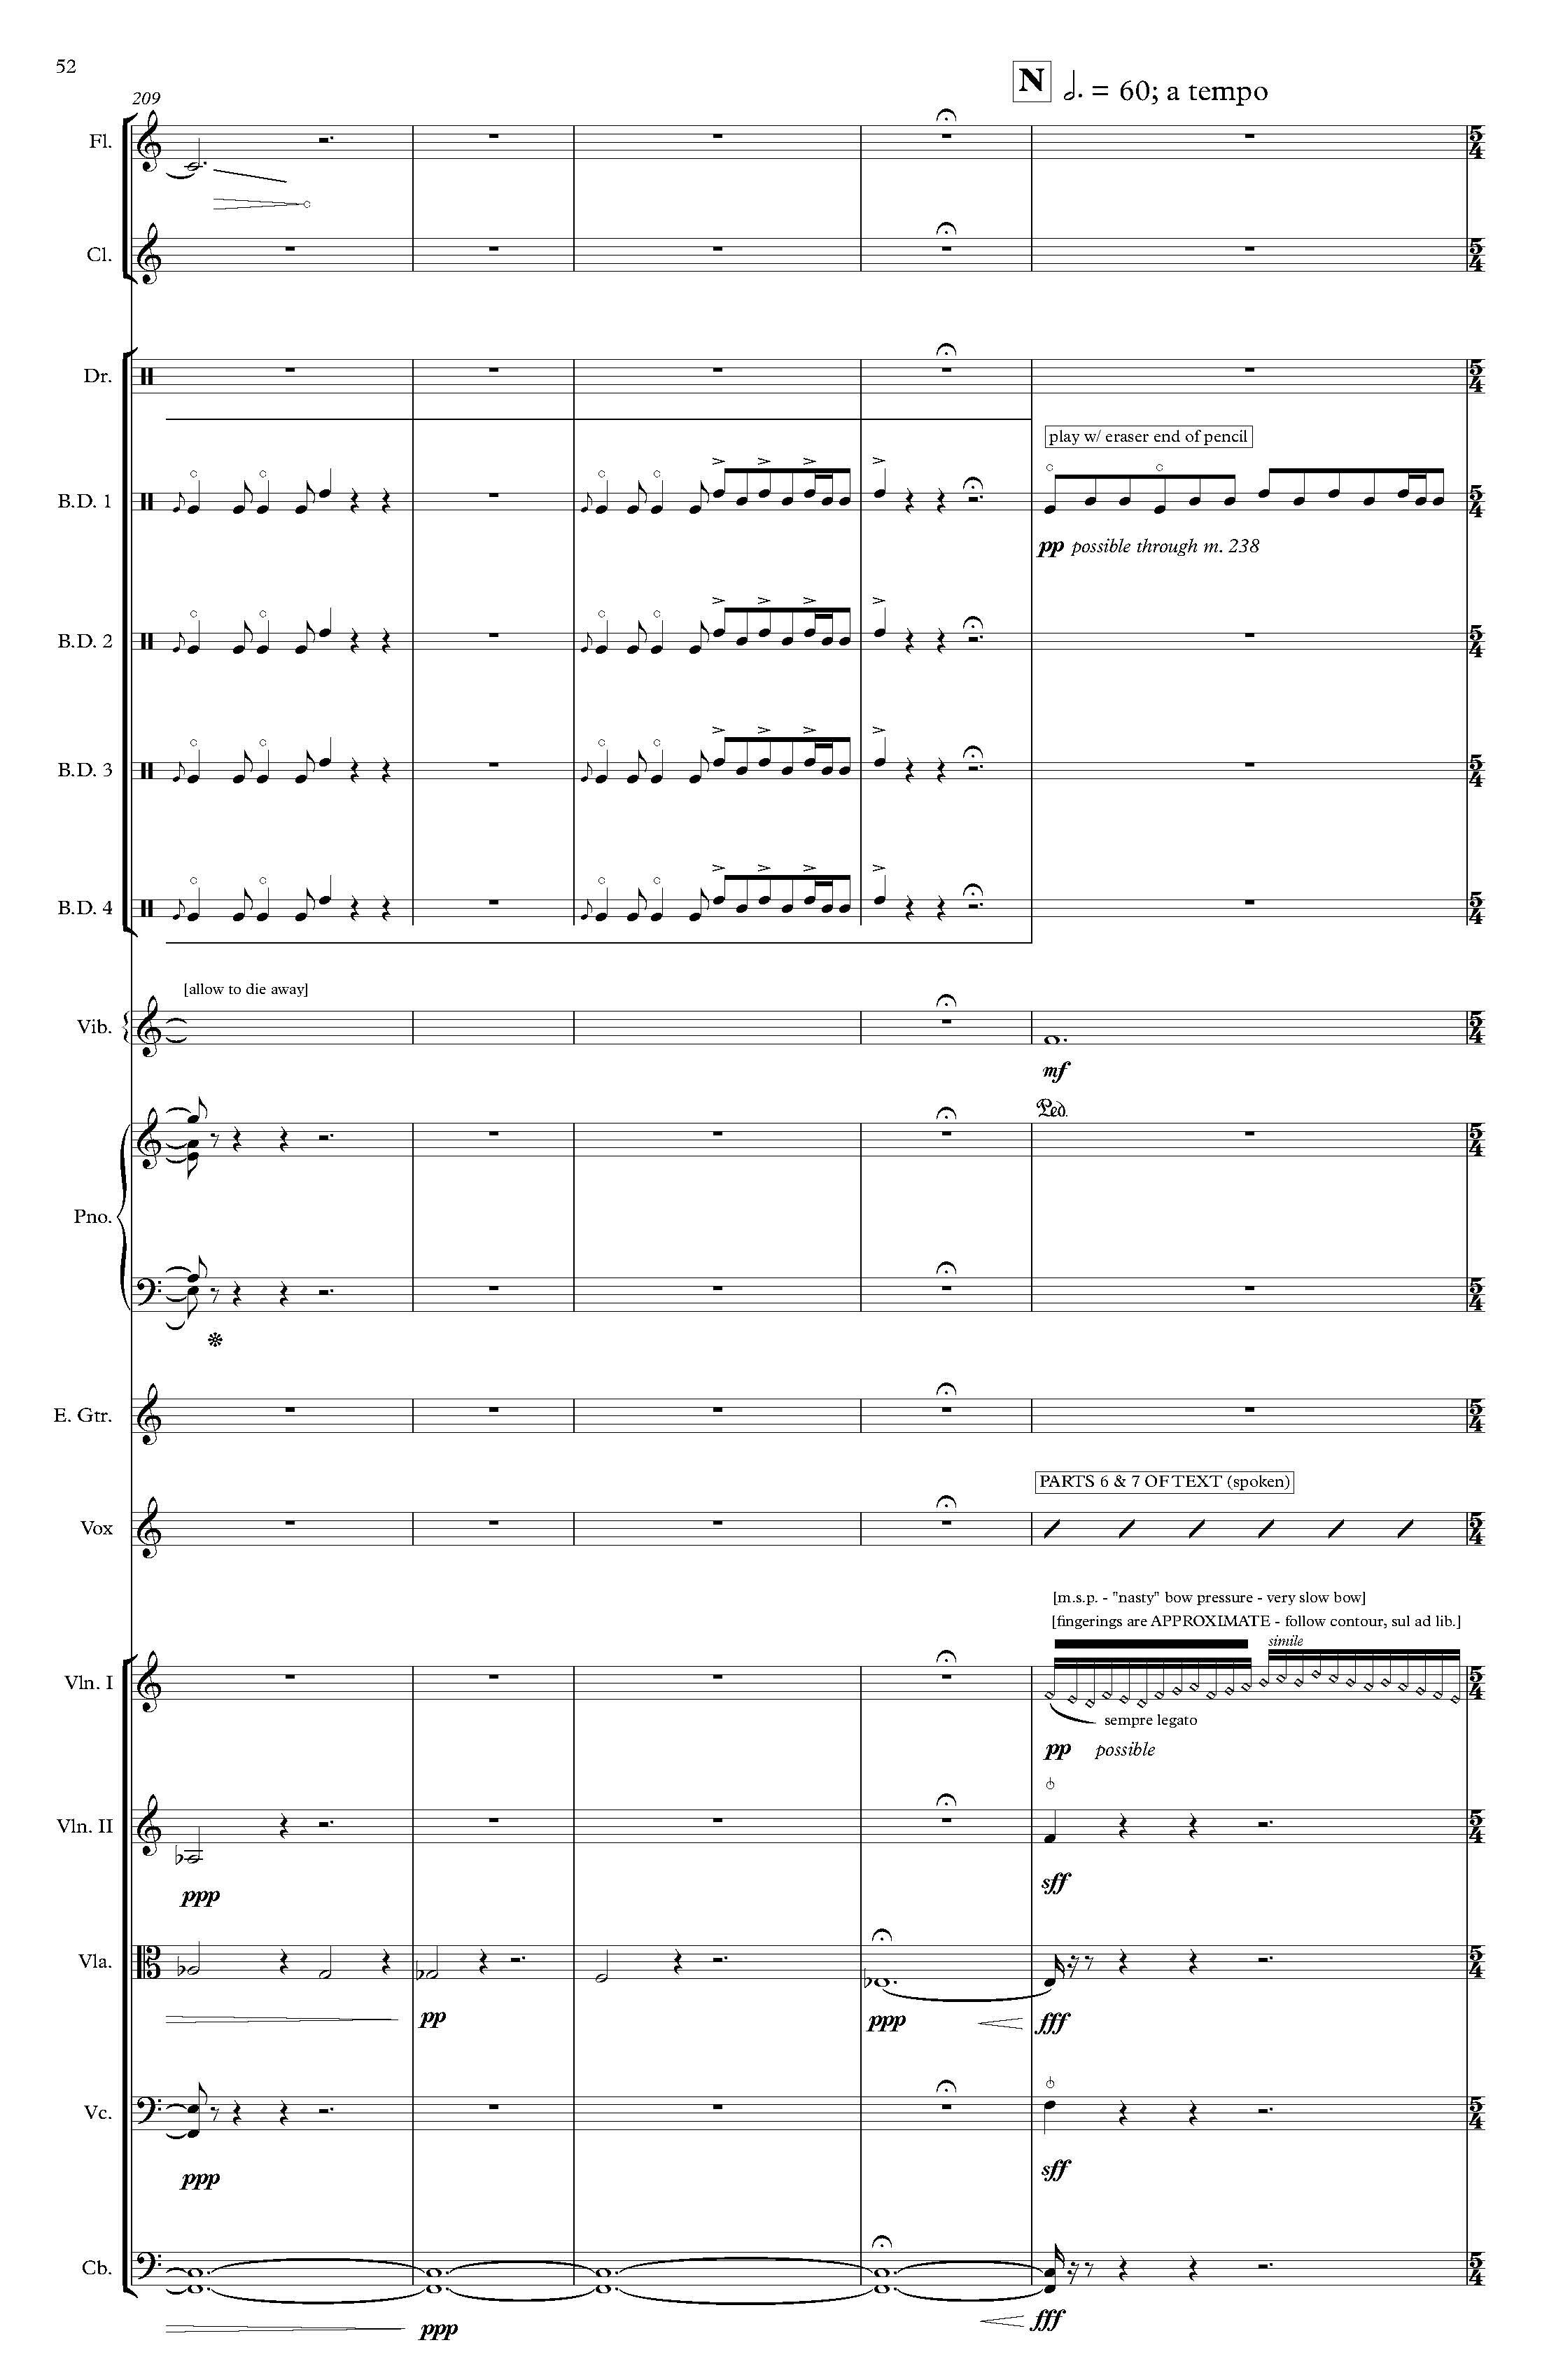 The Rembrandt of Avenue A - Complete Score_Page_58.jpg